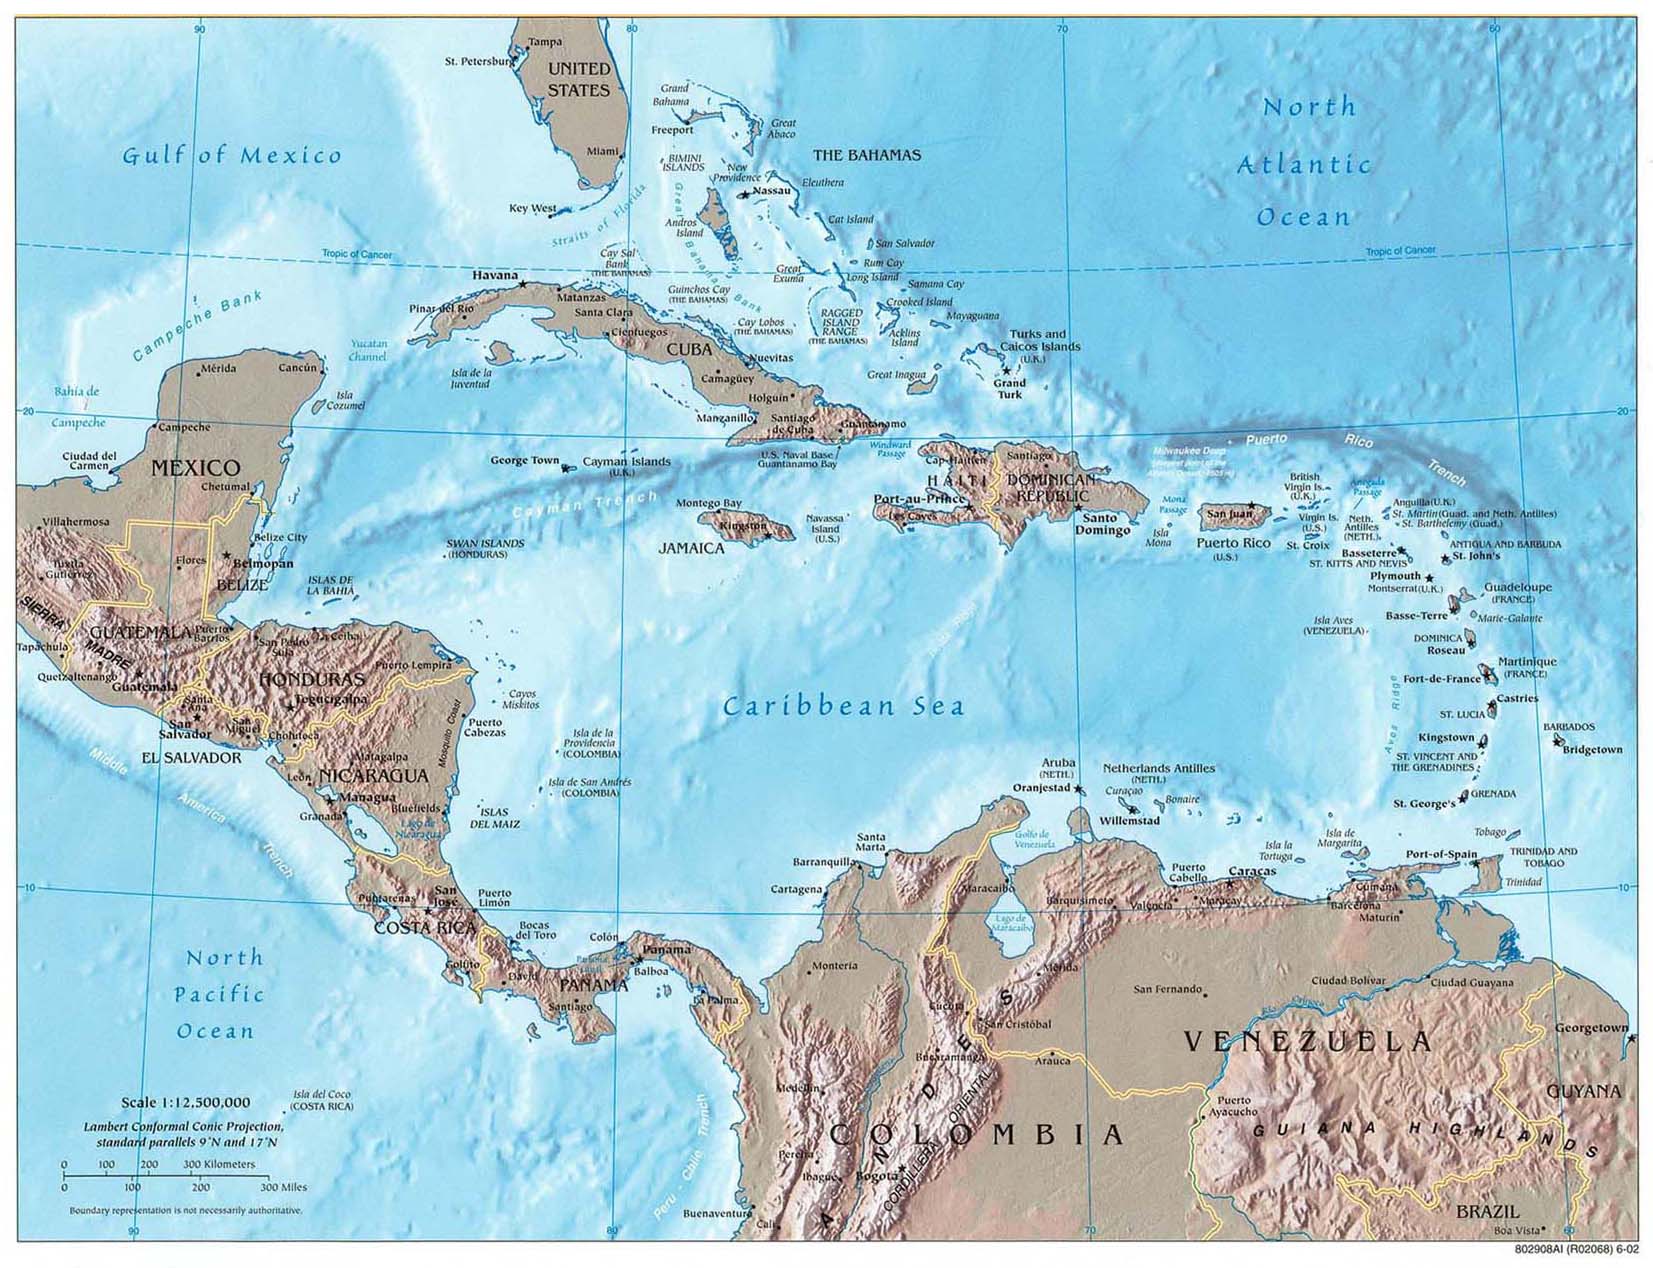 Reference map of Central America and the Caribbean